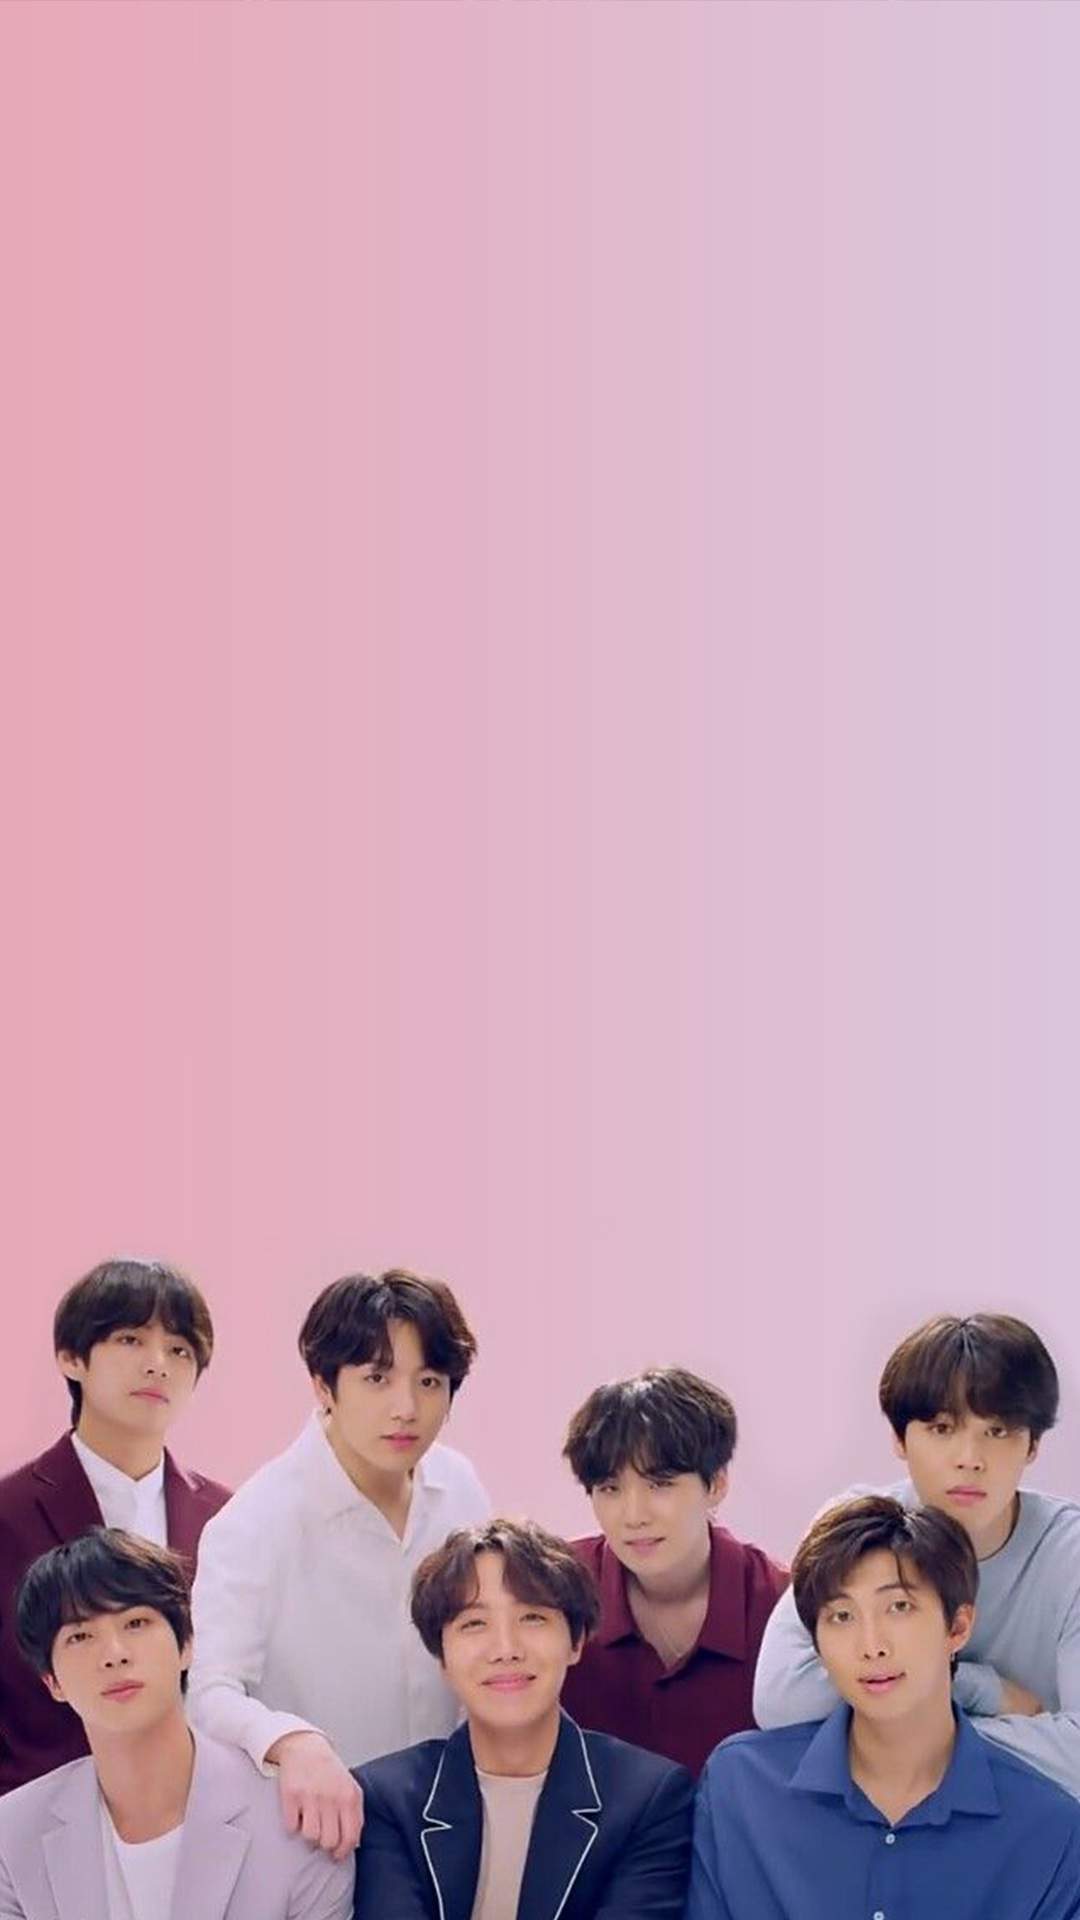 Bts Live Wallpaper Iphone X - Free Wallpapers HD